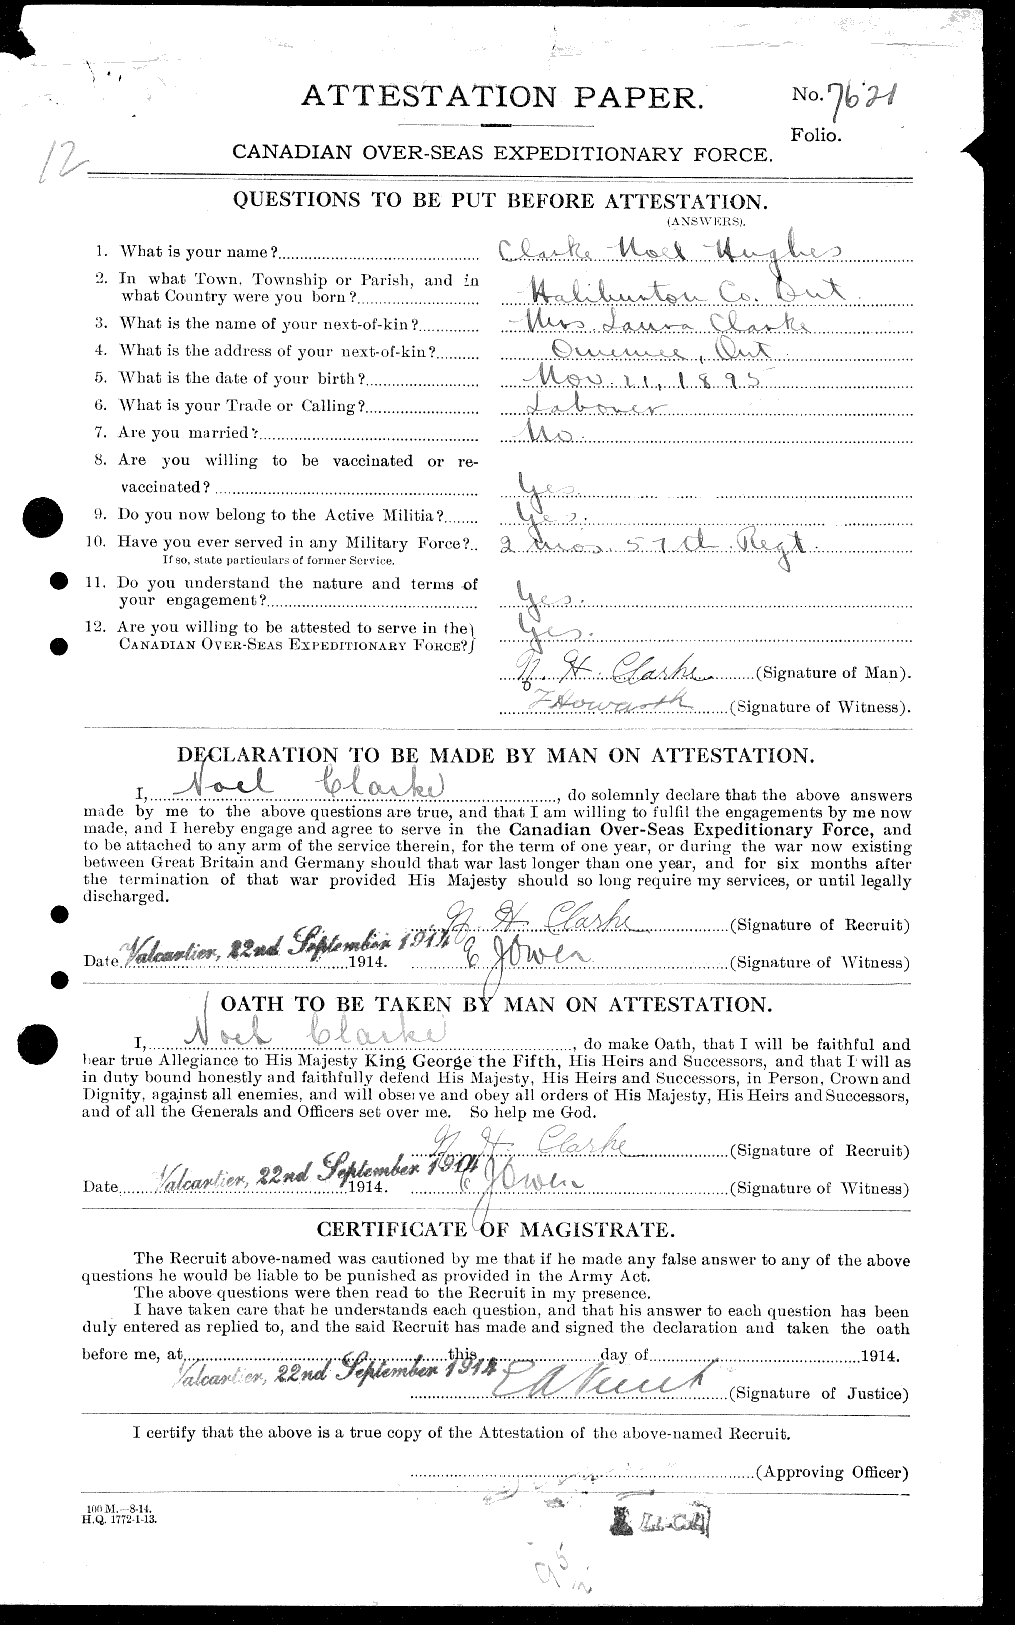 Personnel Records of the First World War - CEF 021204a